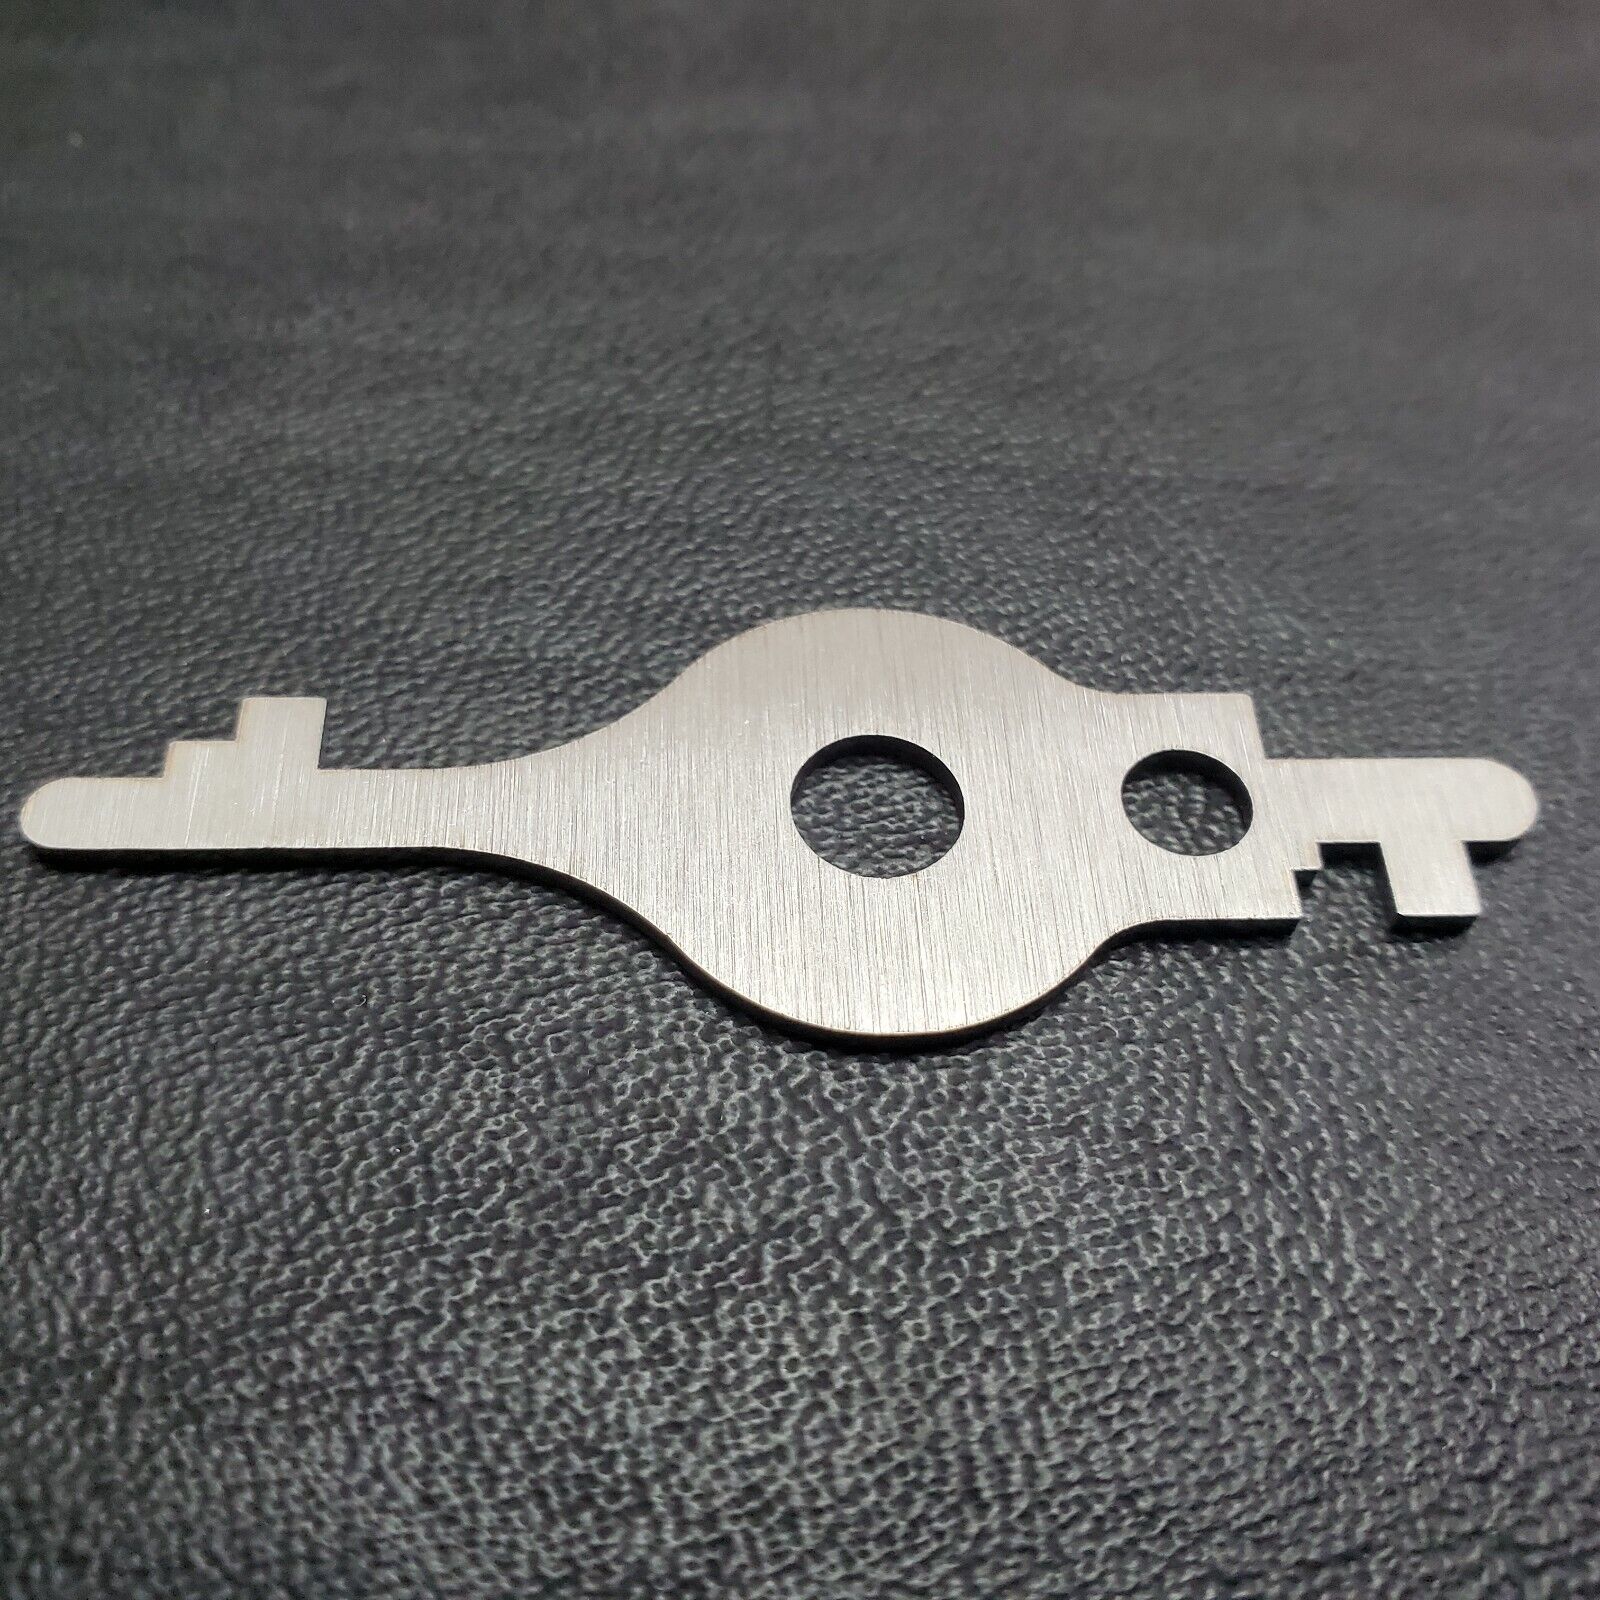 ADD-O-BANK KEY - Original Replica - Includes Instructions - Stainless FREE GIFT